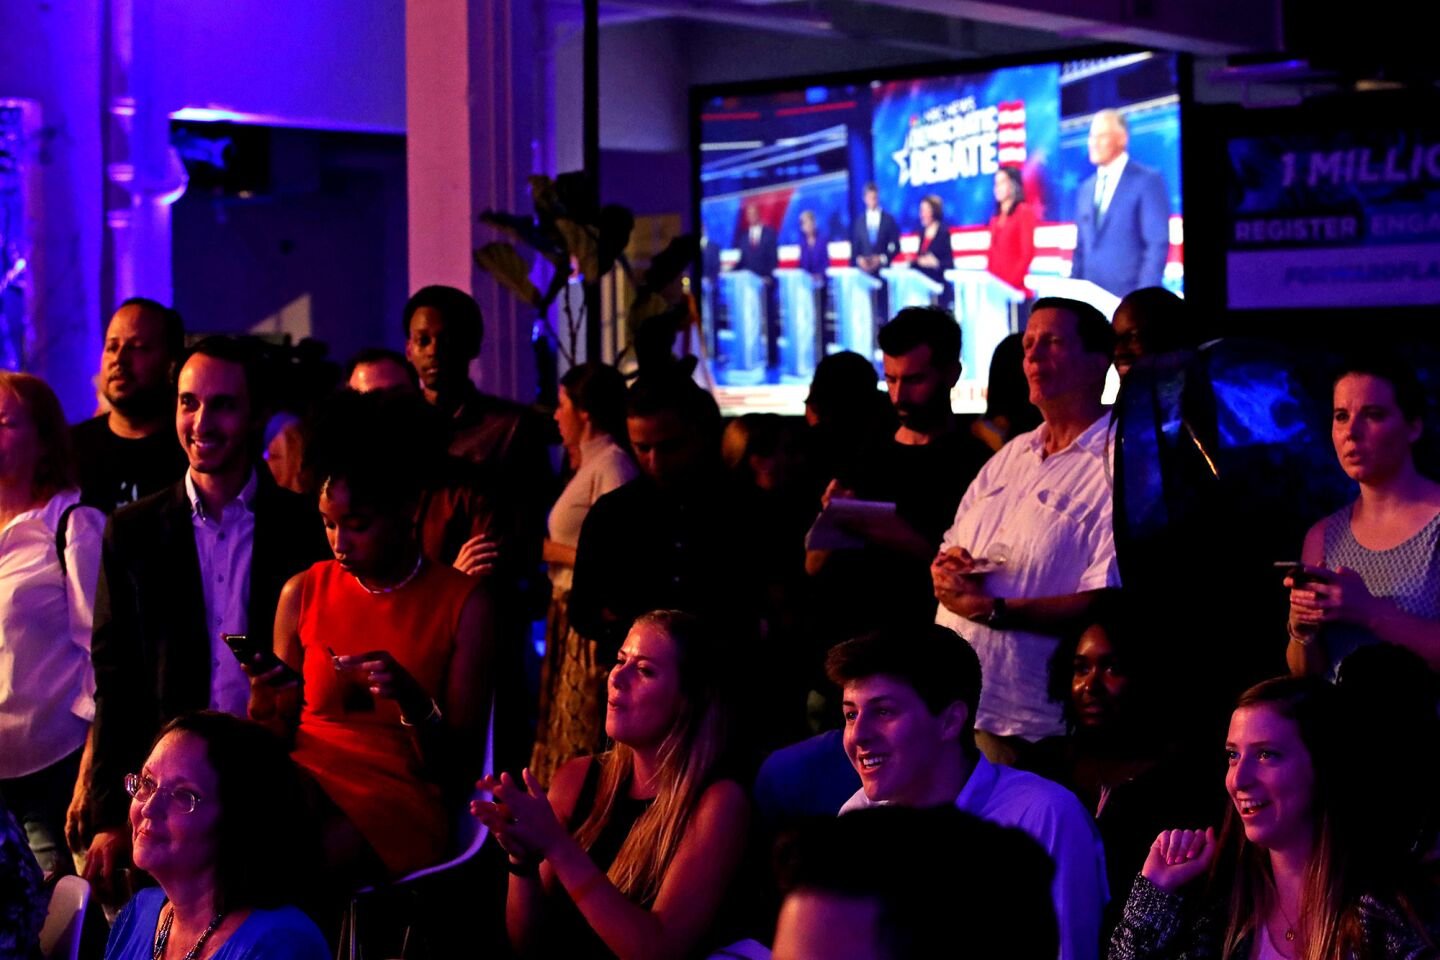 People react at a watch party for the first Democratic presidential primary debates for the 2020 elections in Miami on Wednesday, June 26, 2019.